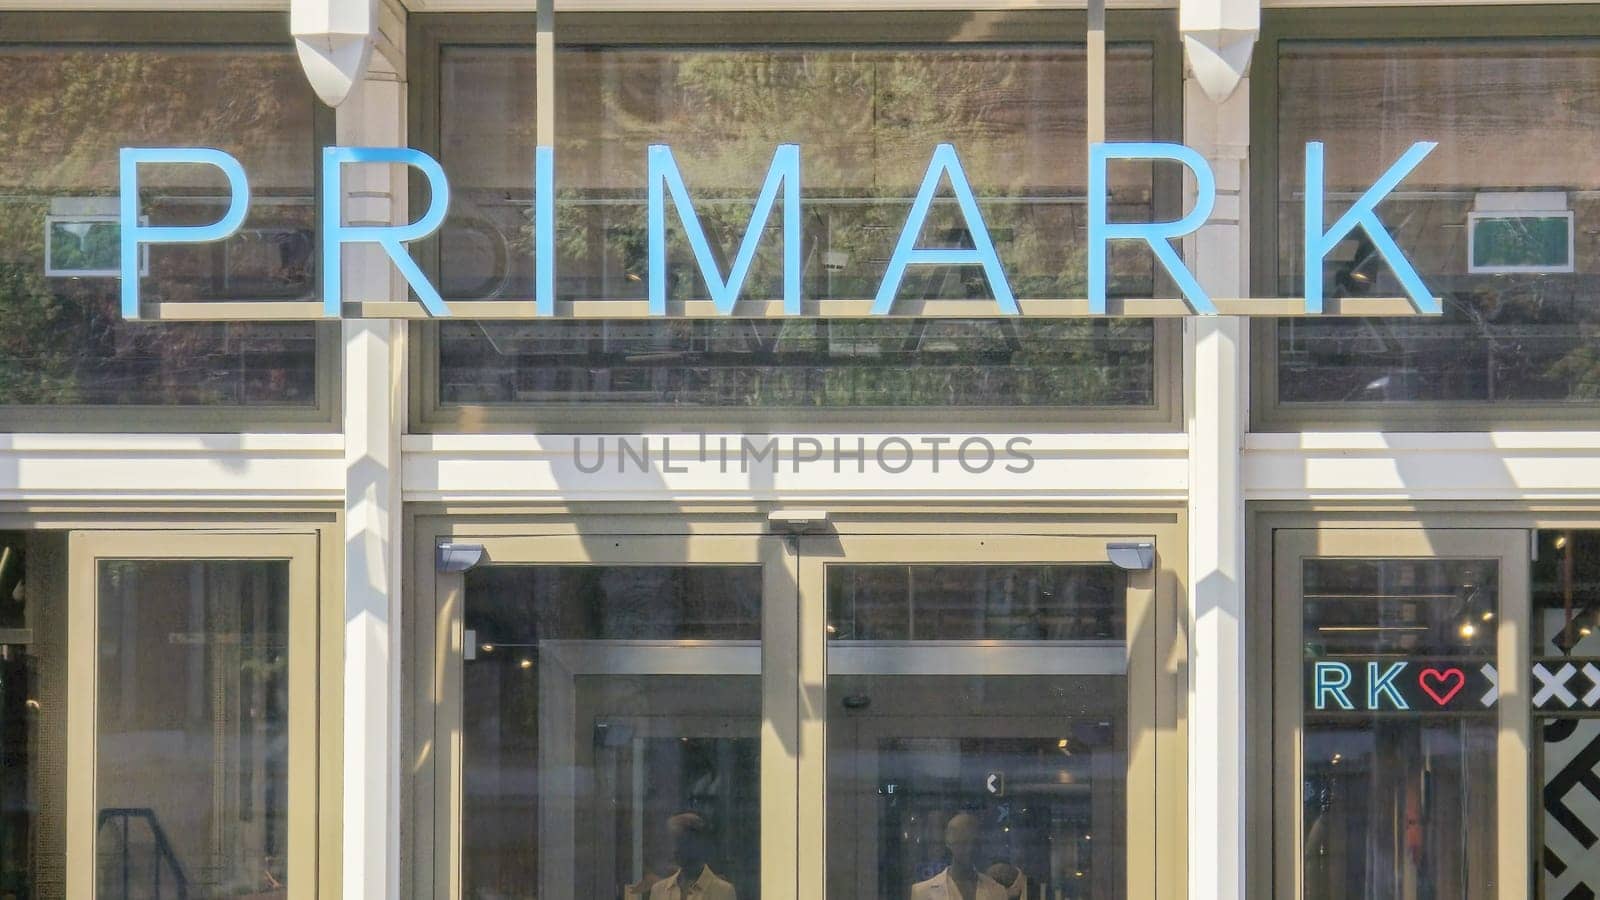 A majestic building adorned with a vibrant sign that reads Primark, inviting fashion-forward individuals to explore trendy clothing options by fokkebok